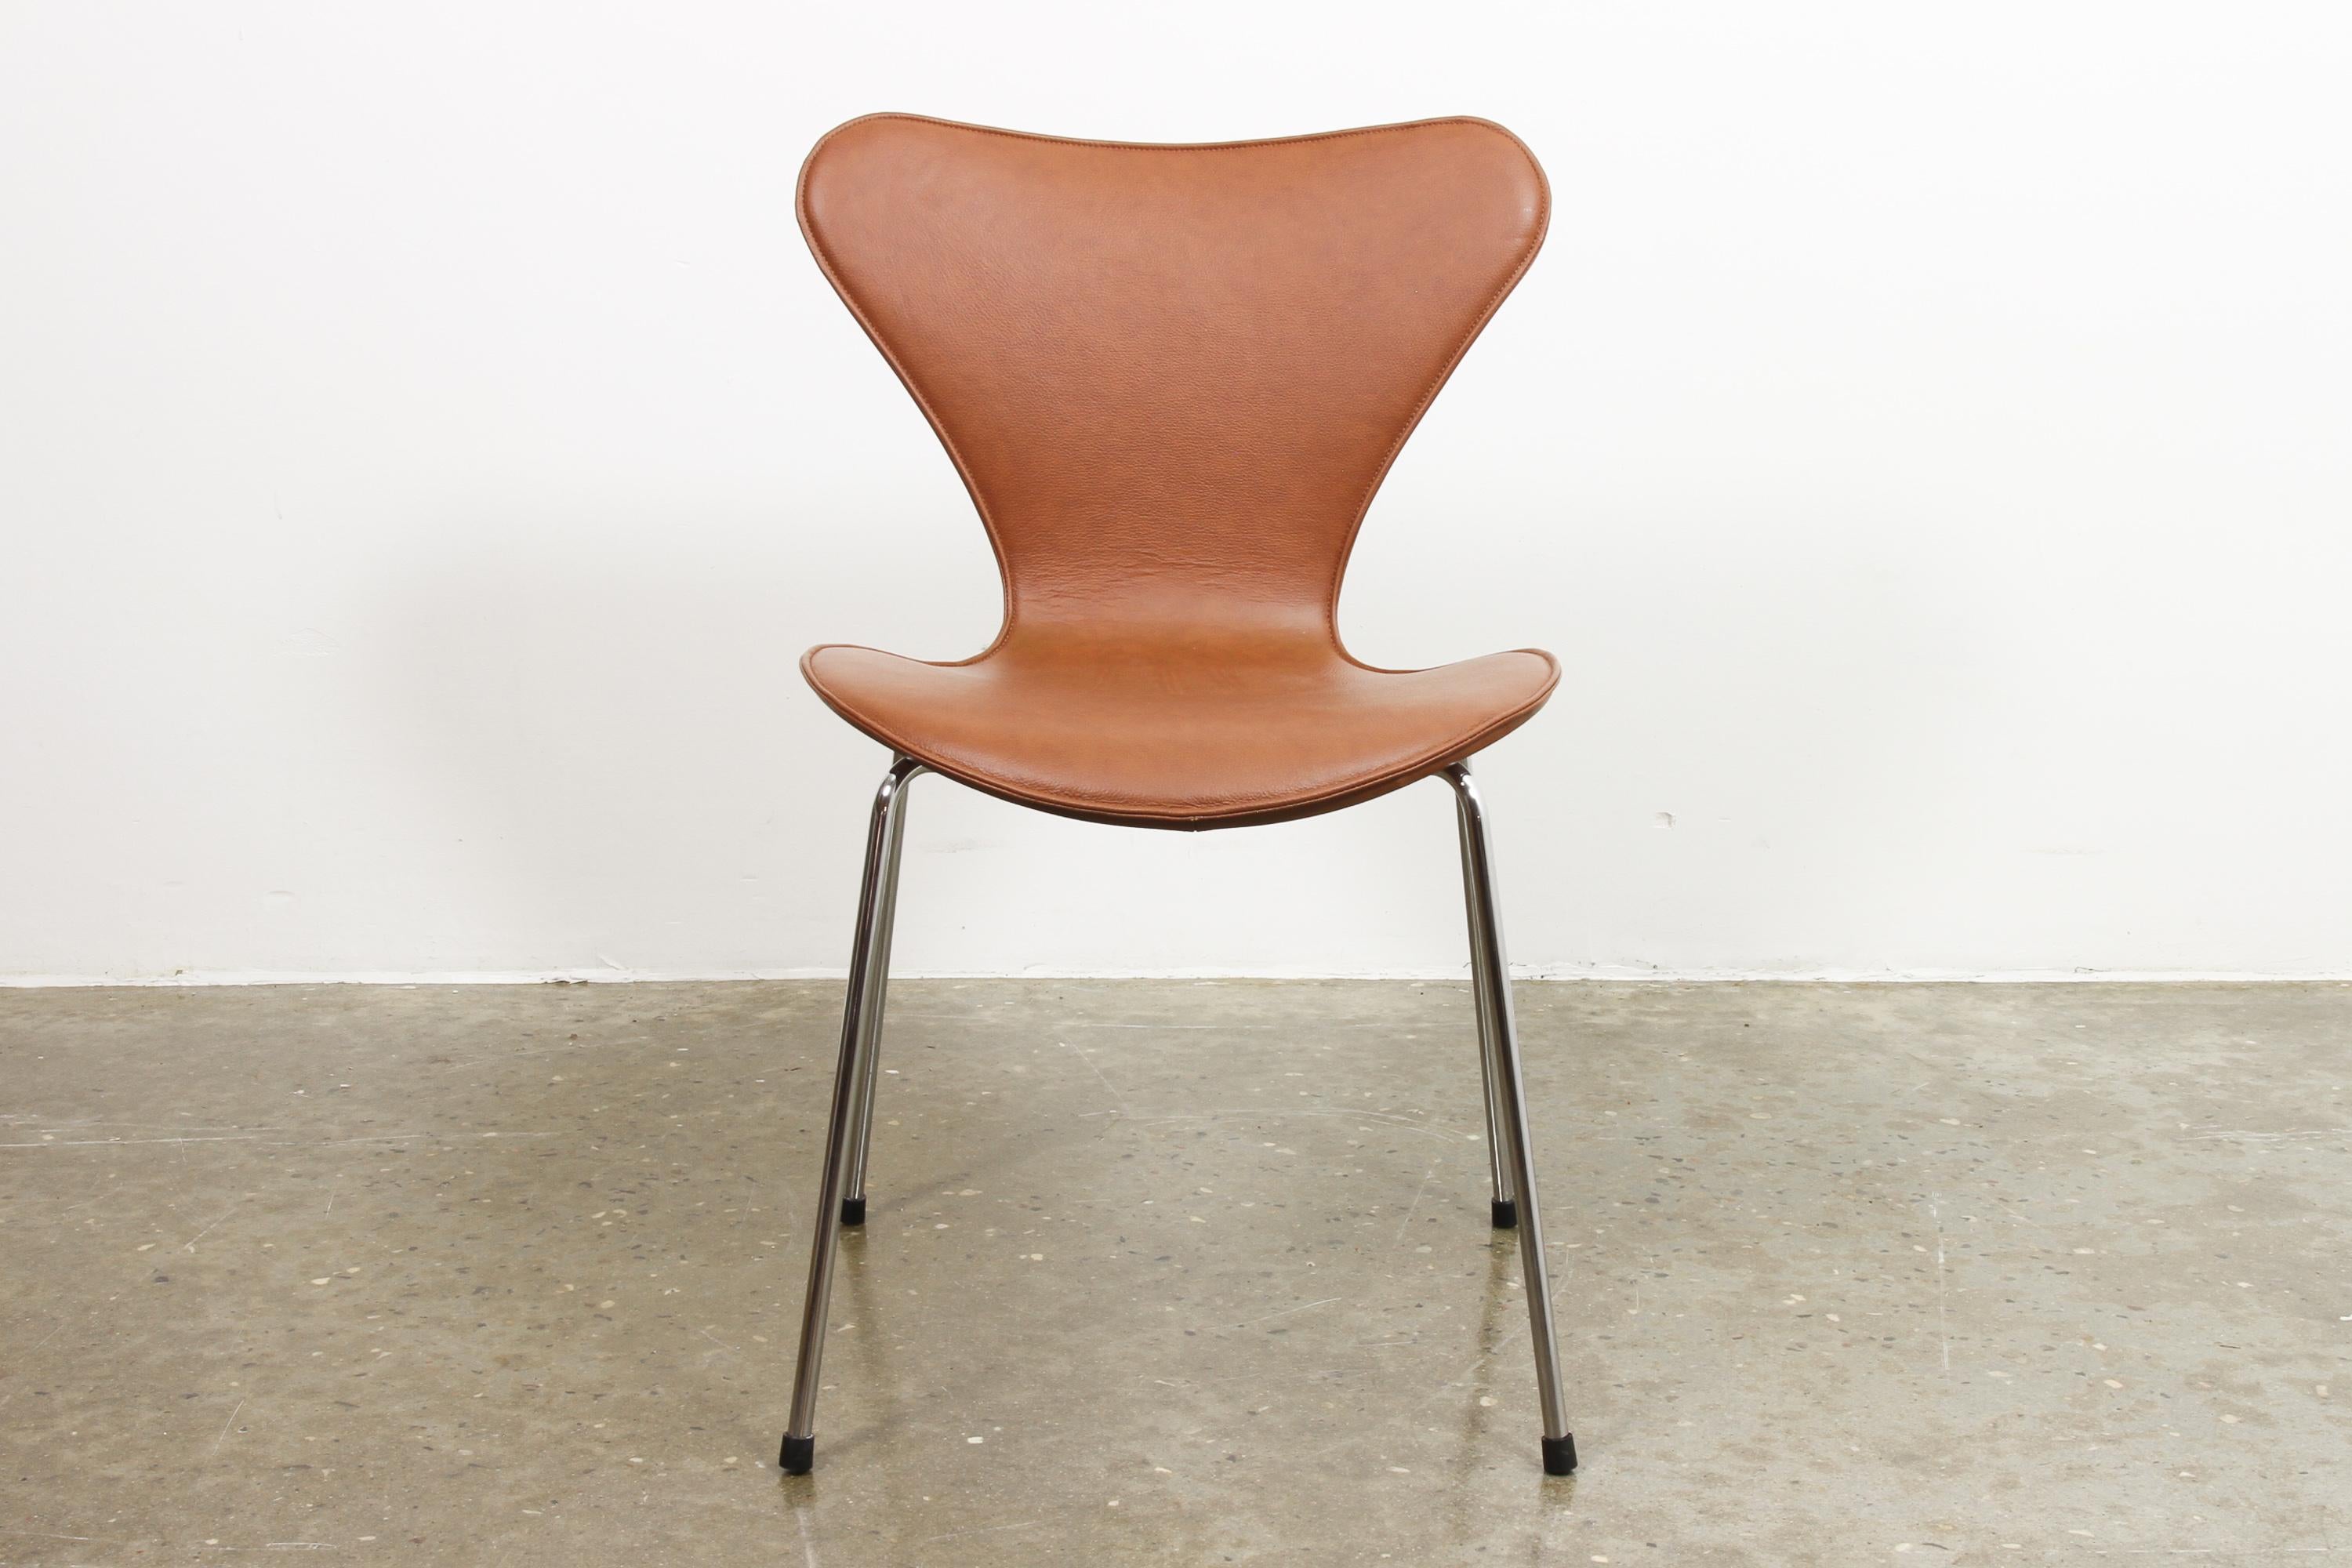 Arne Jacobsen dining chair Model 3107 cognac leather.
Model 3107 also know as series 7, Butterfly Chair or in Danish Syveren. One of the most famous and iconic designs from Danish architect Arne Jacobsen made by Fritz Hansen. A true danish